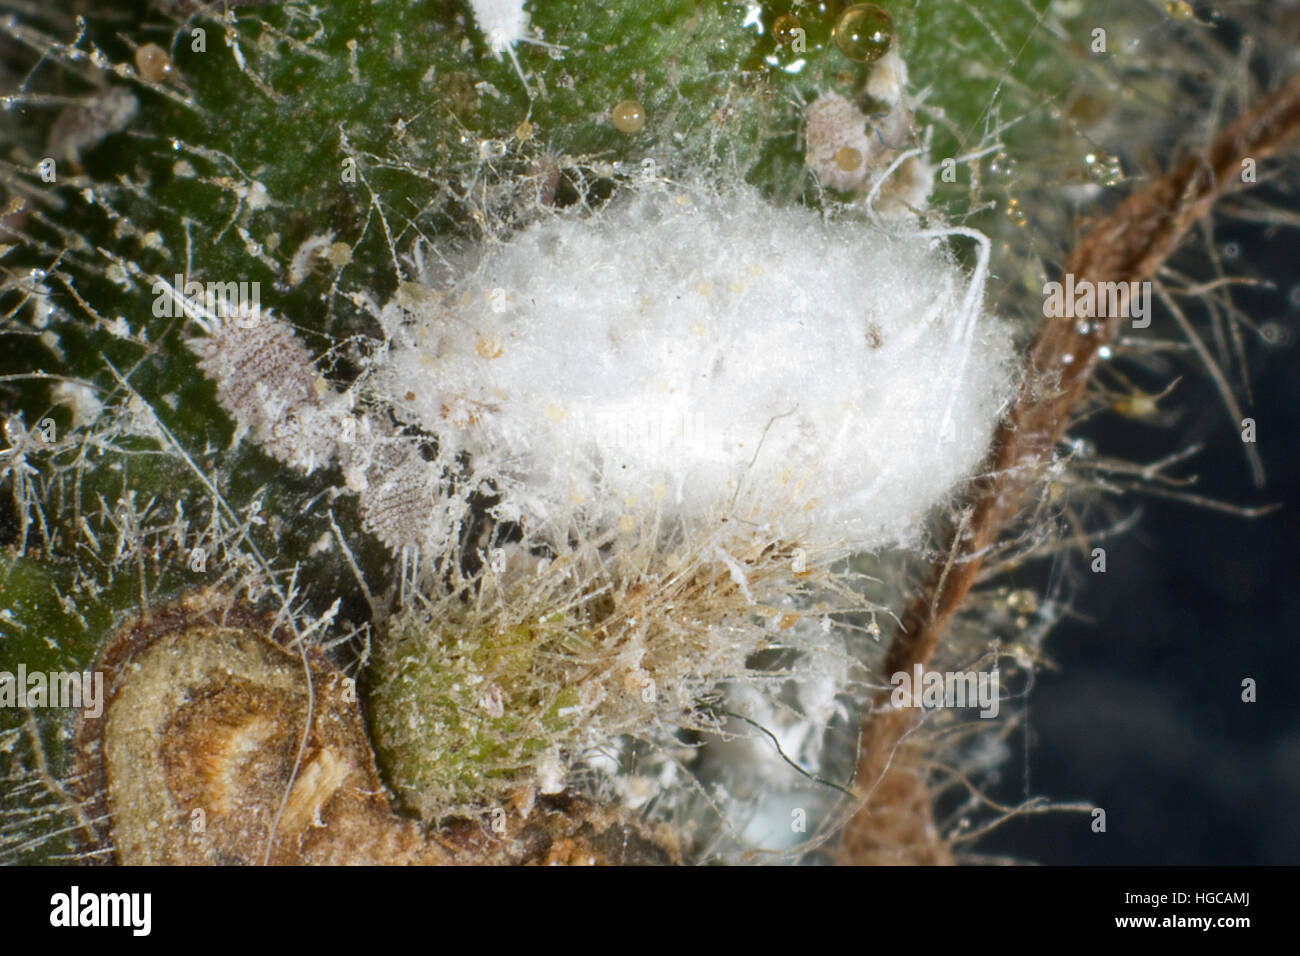 Glasshouse or tuber mealybugs, Pseudococcus viburni, waxy exudation and adults on the stem of a house plant Stock Photo